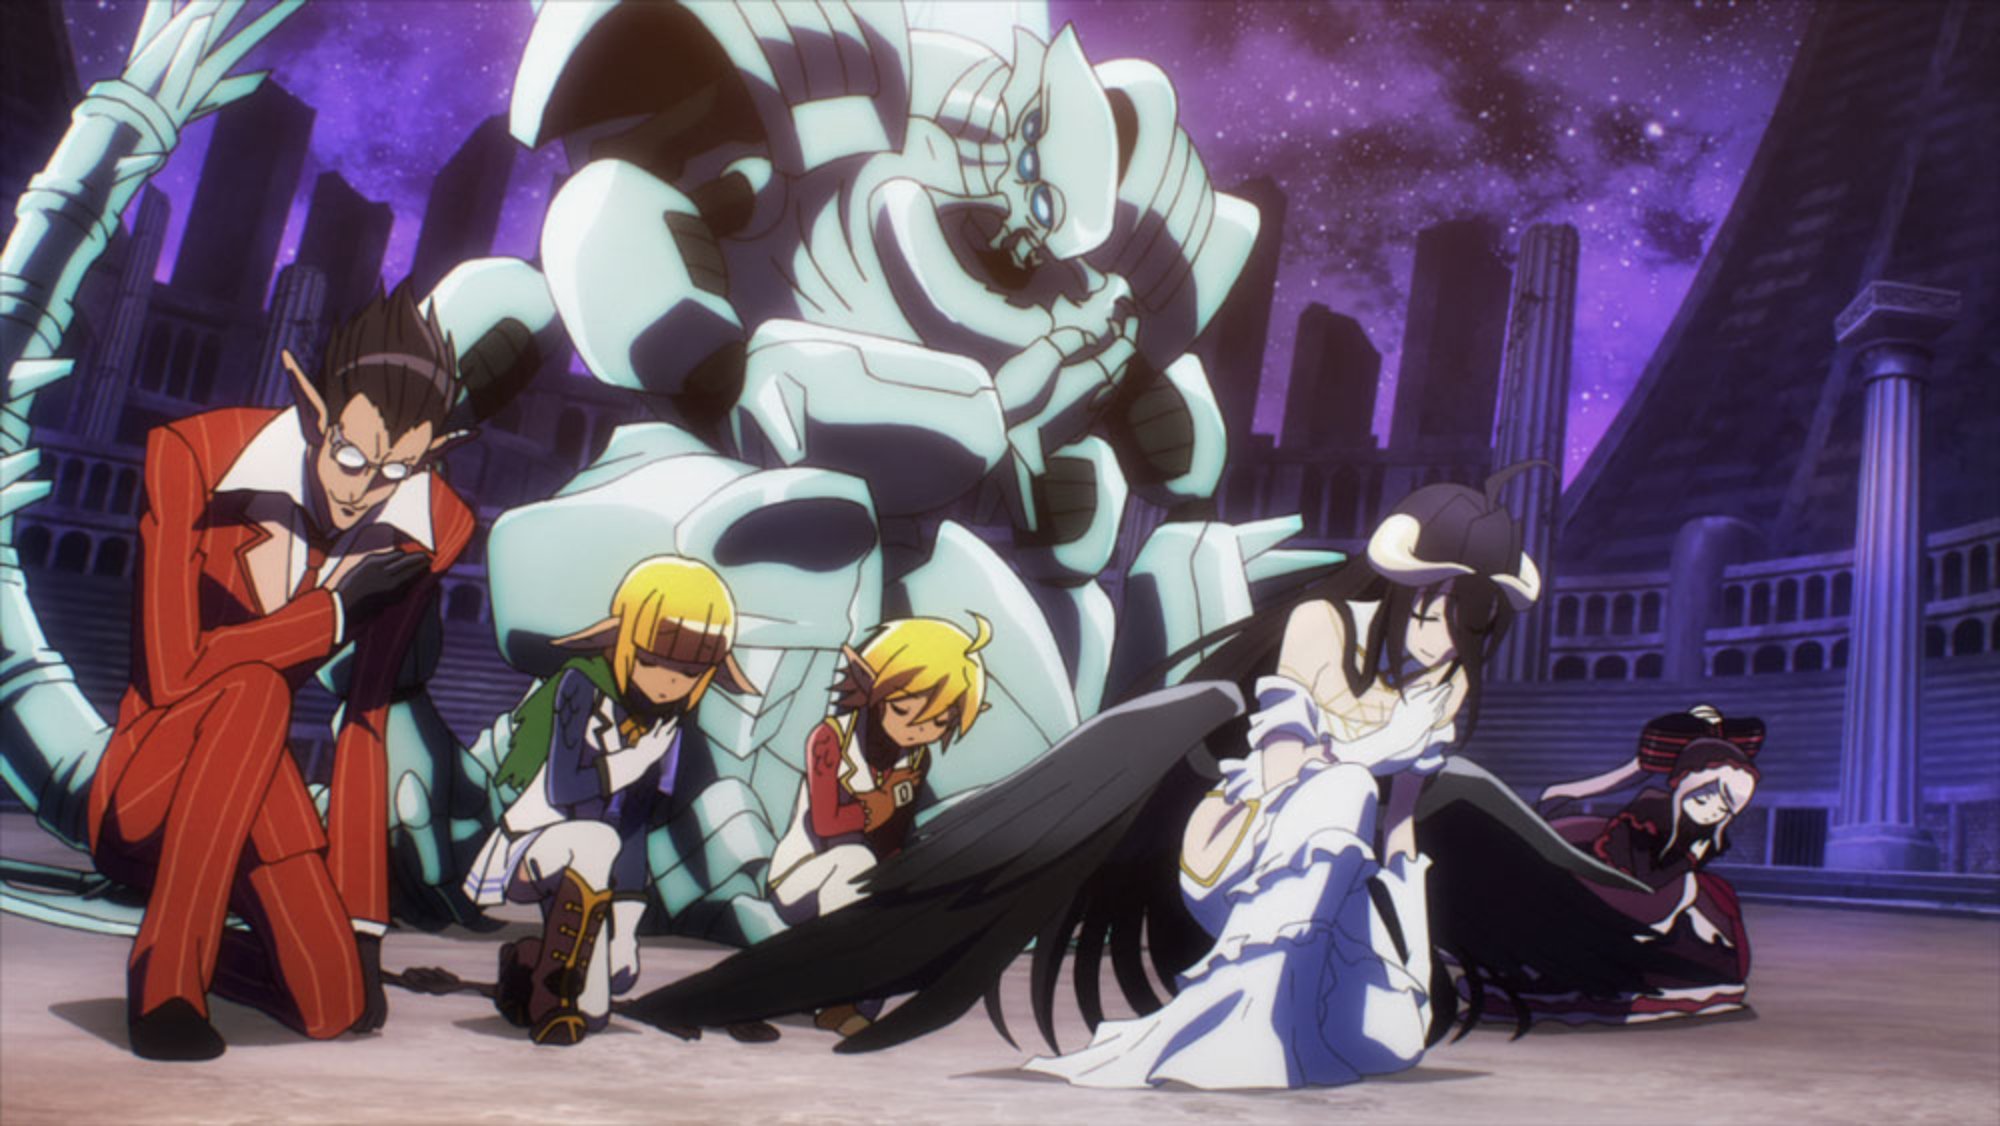 'Overlord' Demiurge (voiced by Masayuki Katô), Aura (voiced by Emiri Kato), Mare (voiced by Yumi Uchiyama), Cocytus (voiced by Kenta Miyake), Albedo (voiced by Yumi Hara), Shalltear (voiced by Sumire Uesaka) bowing in front of chair.